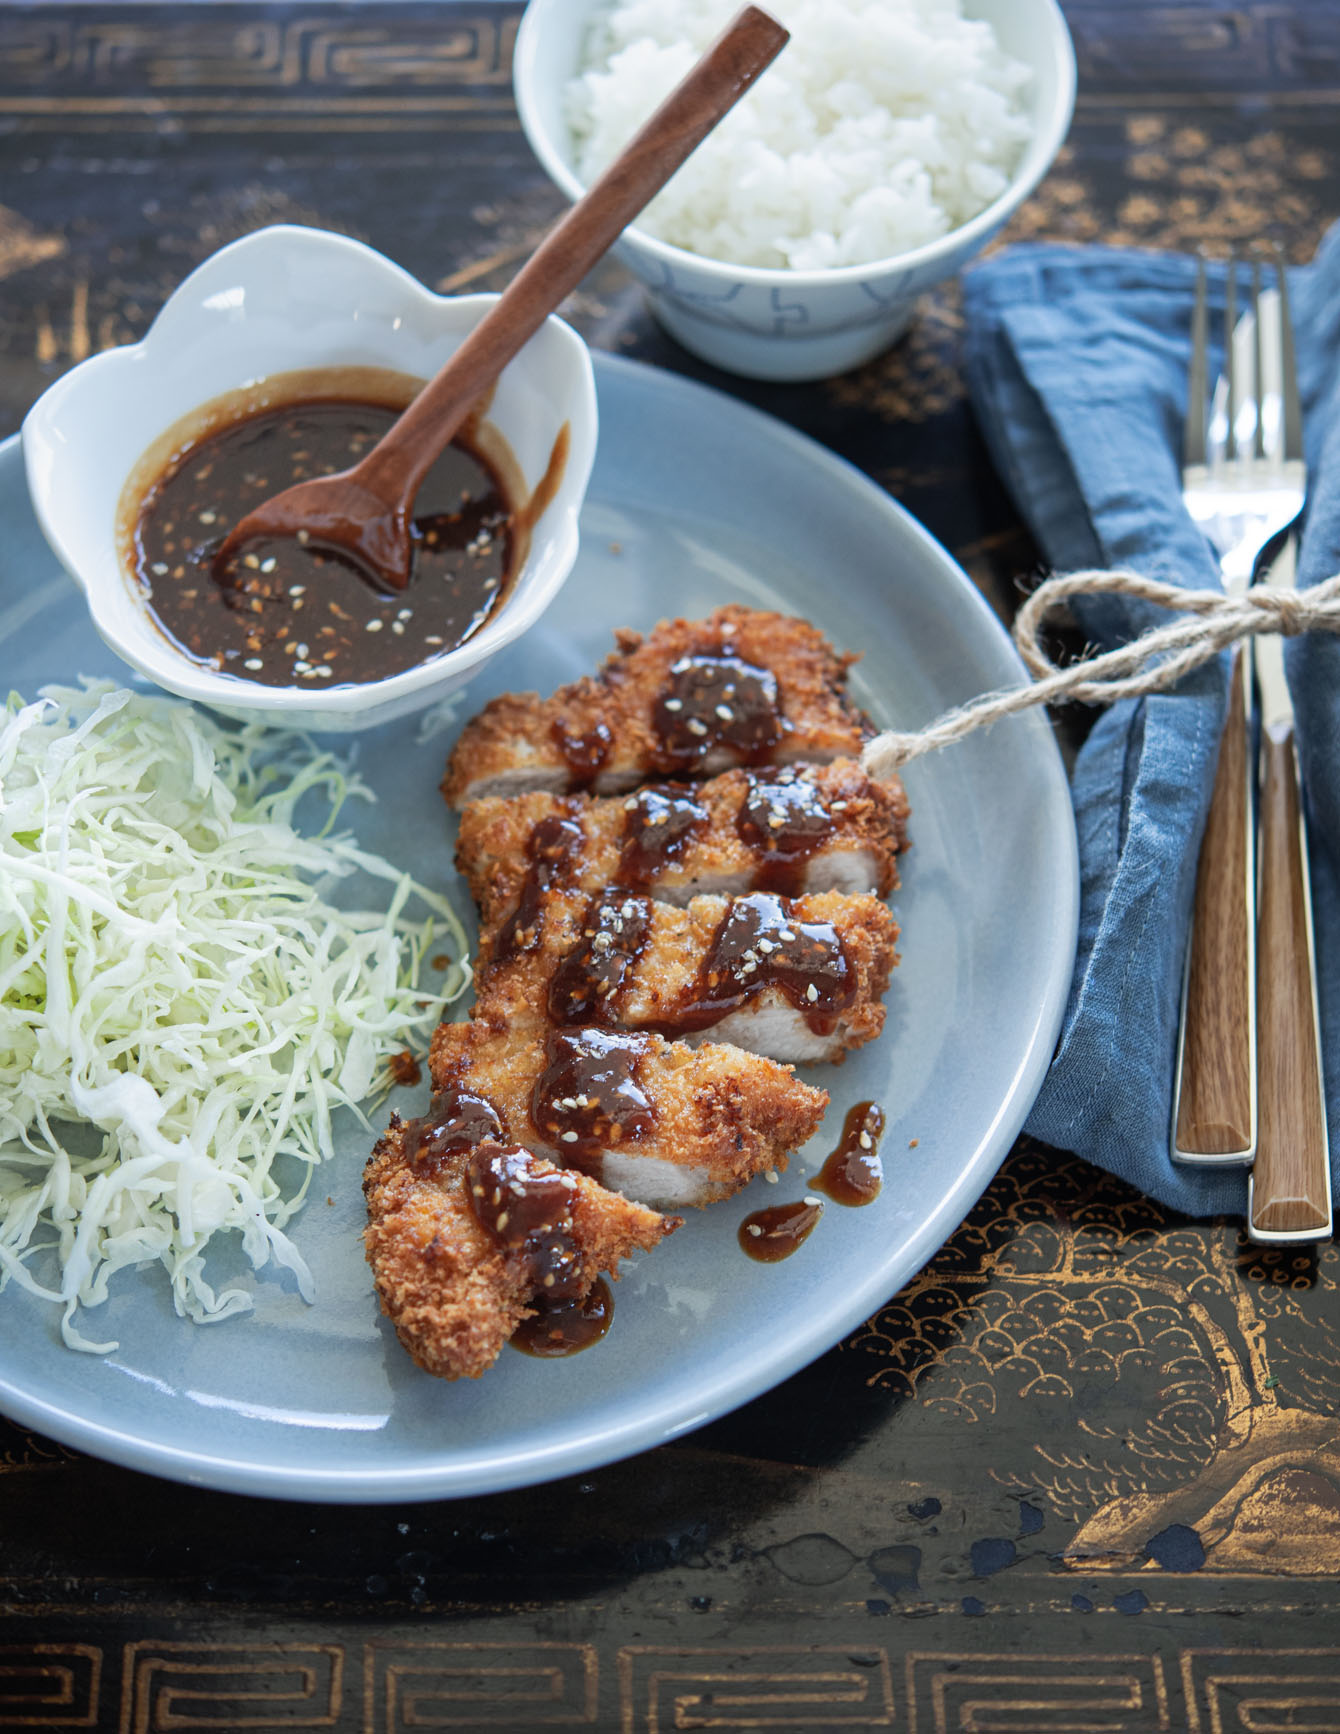 Japanese pork cutlet served with homemade tonkatsu sauce and crisp cabbage.